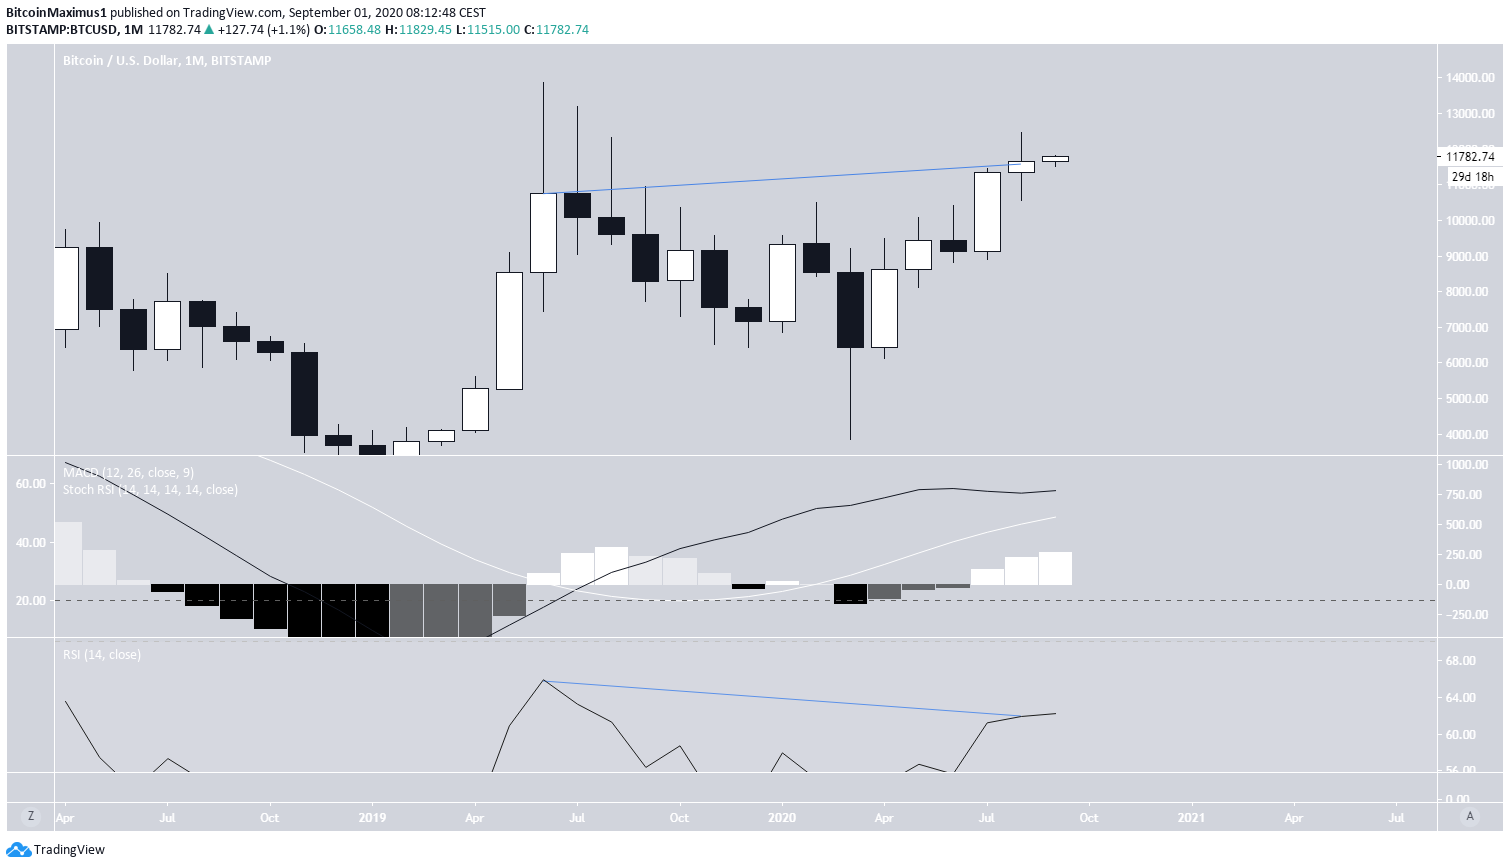 Bitcoin's Monthly Close